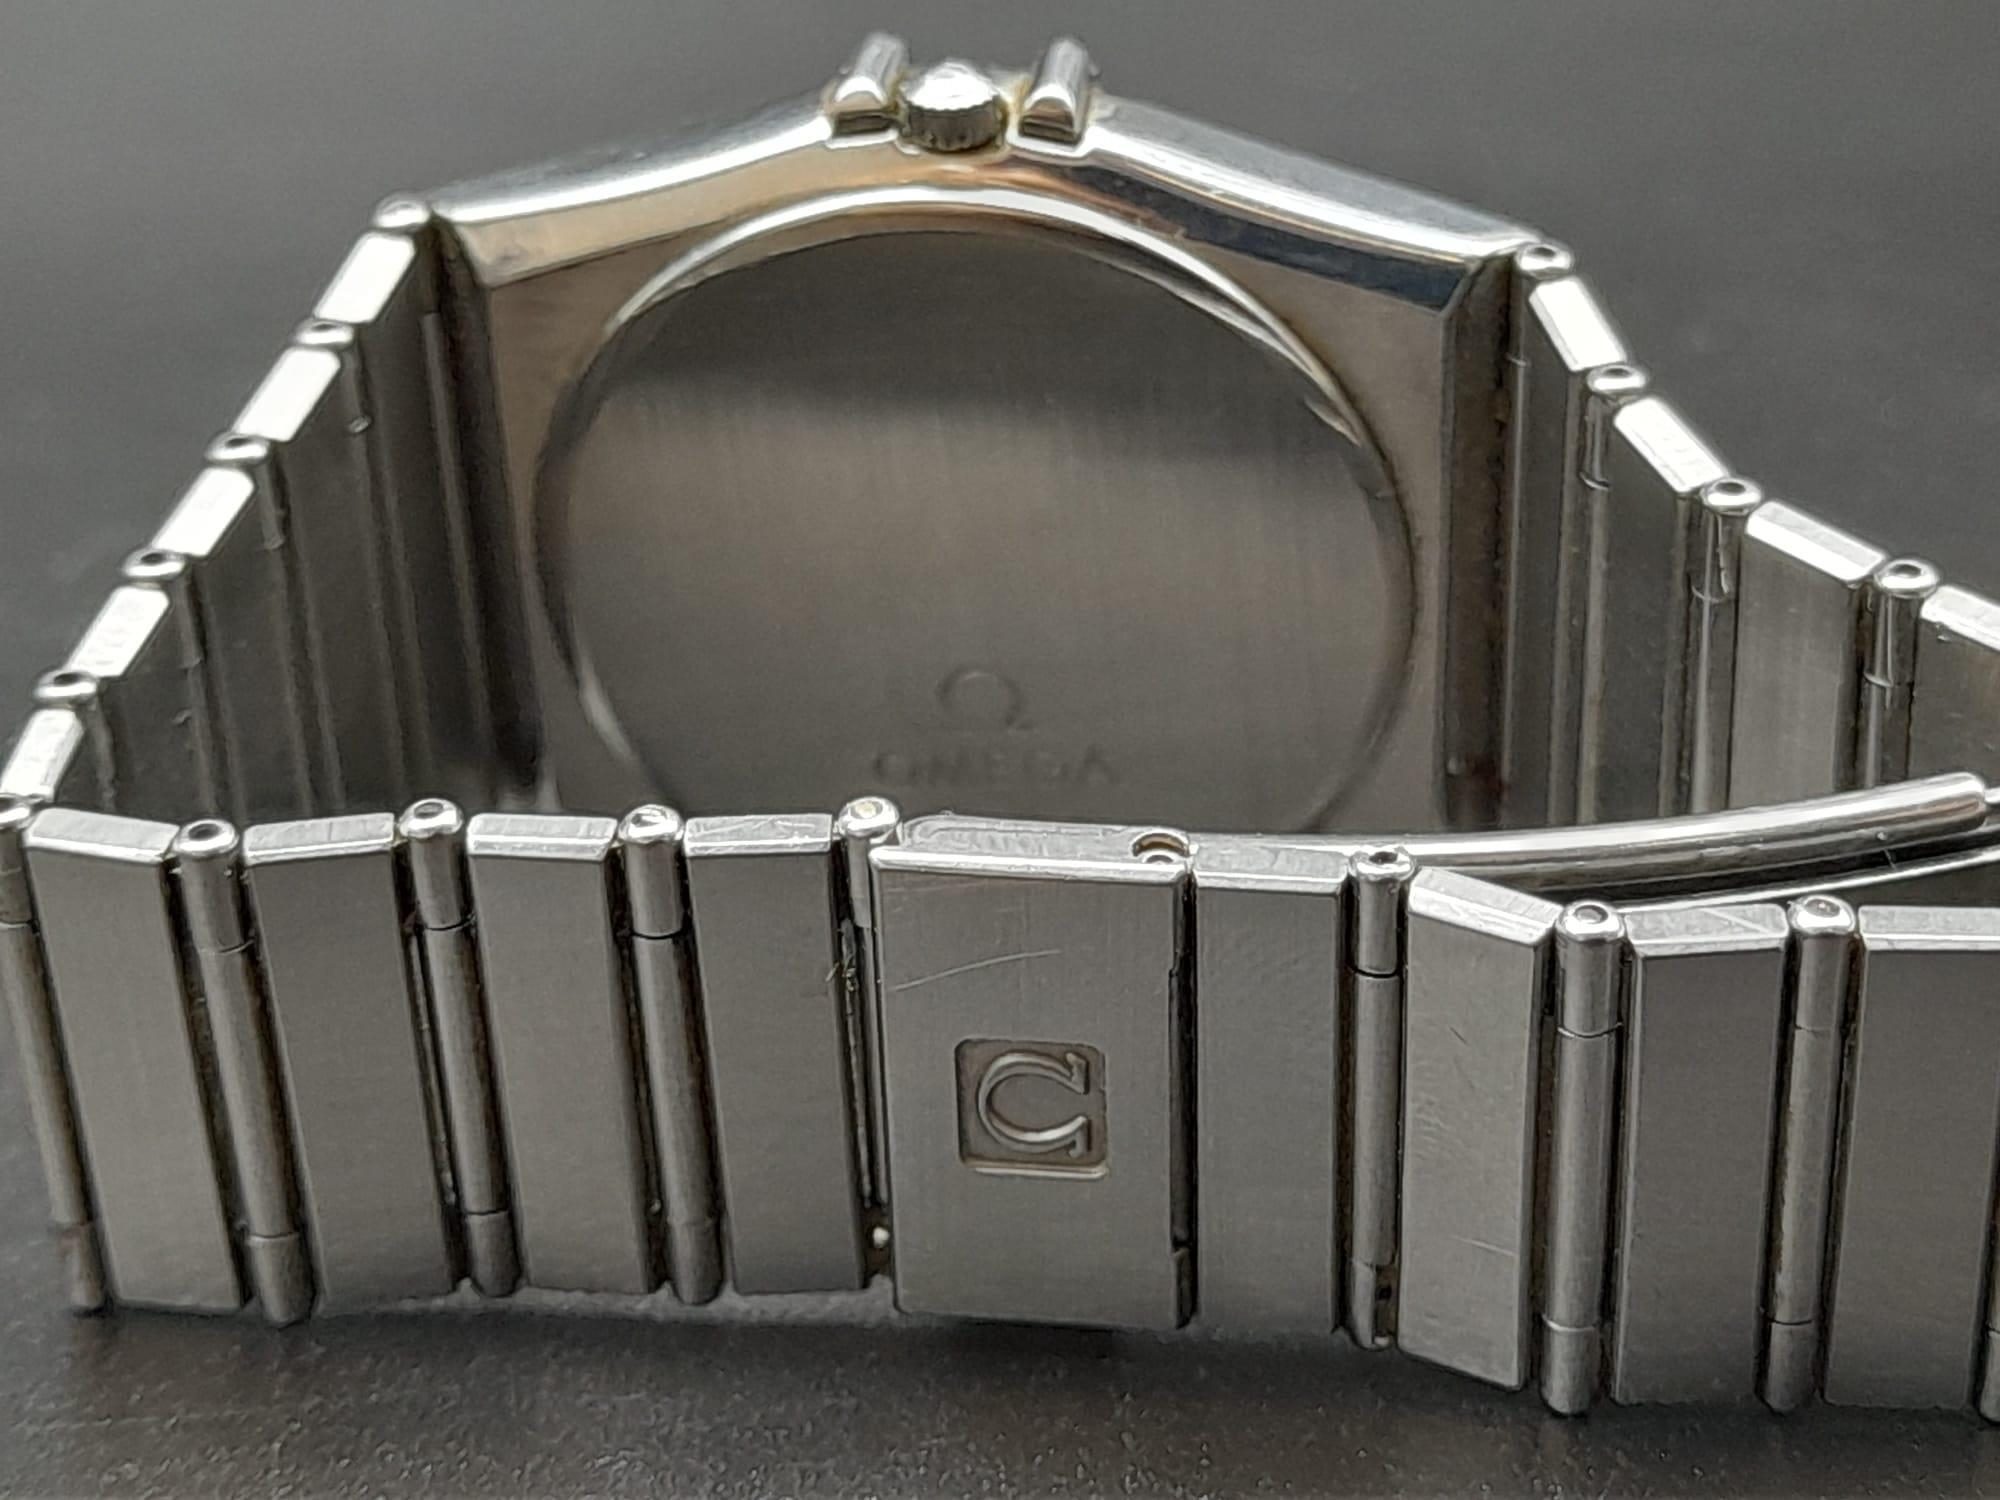 OMEGA CONSTELATION QUARTZ BRACELET WATCH WITH ORIGINAL BOX AND PAPERS. 32mm. Needs batteries. - Image 6 of 13